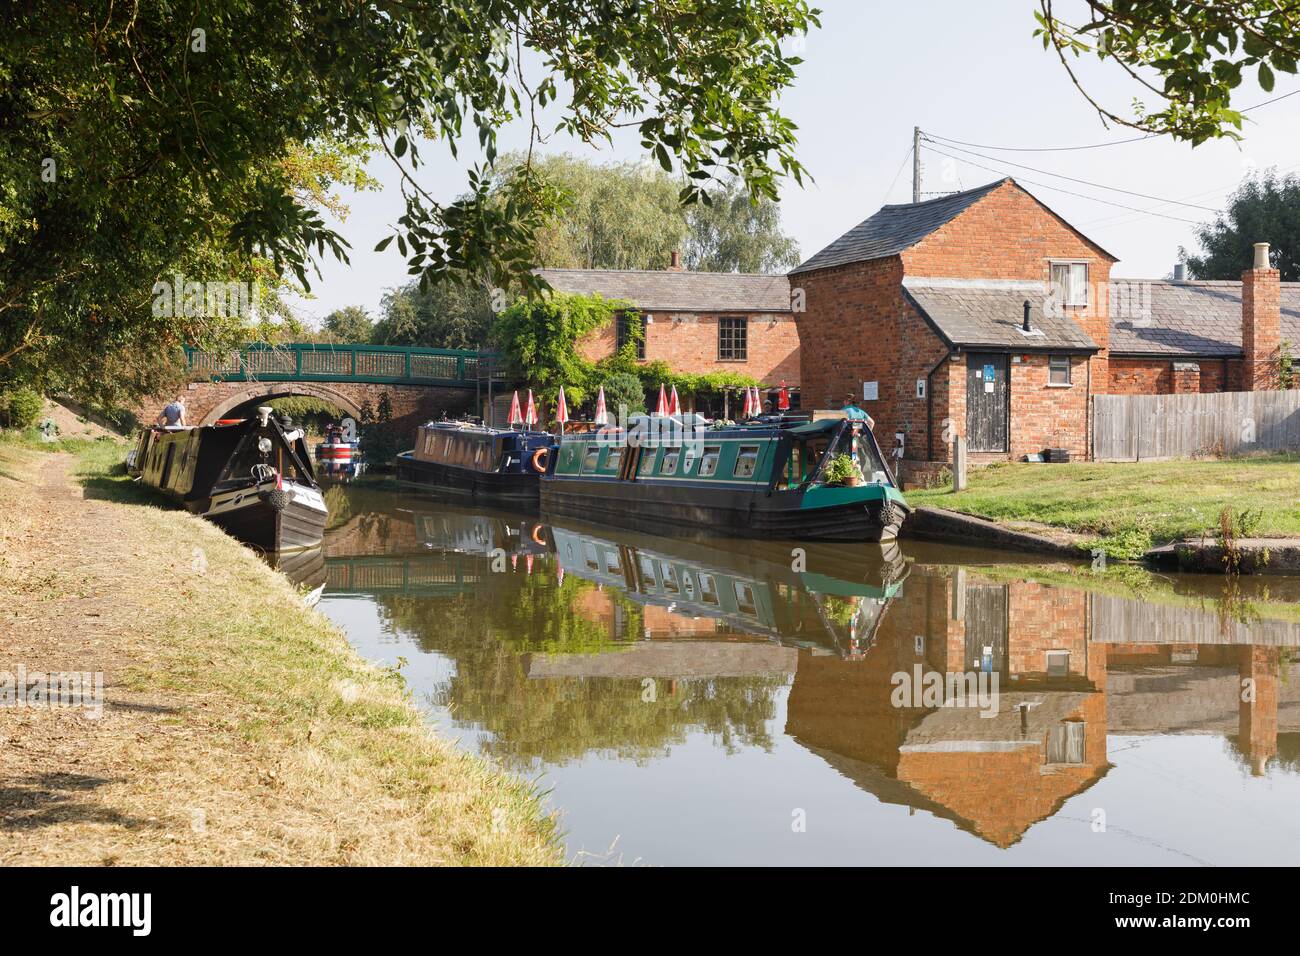 Crick, Northamptonshire, UK - 13/08/20: Narrowboats moored at Crick Wharf on the Grand union canal, a popular location for boating holidays. Stock Photo